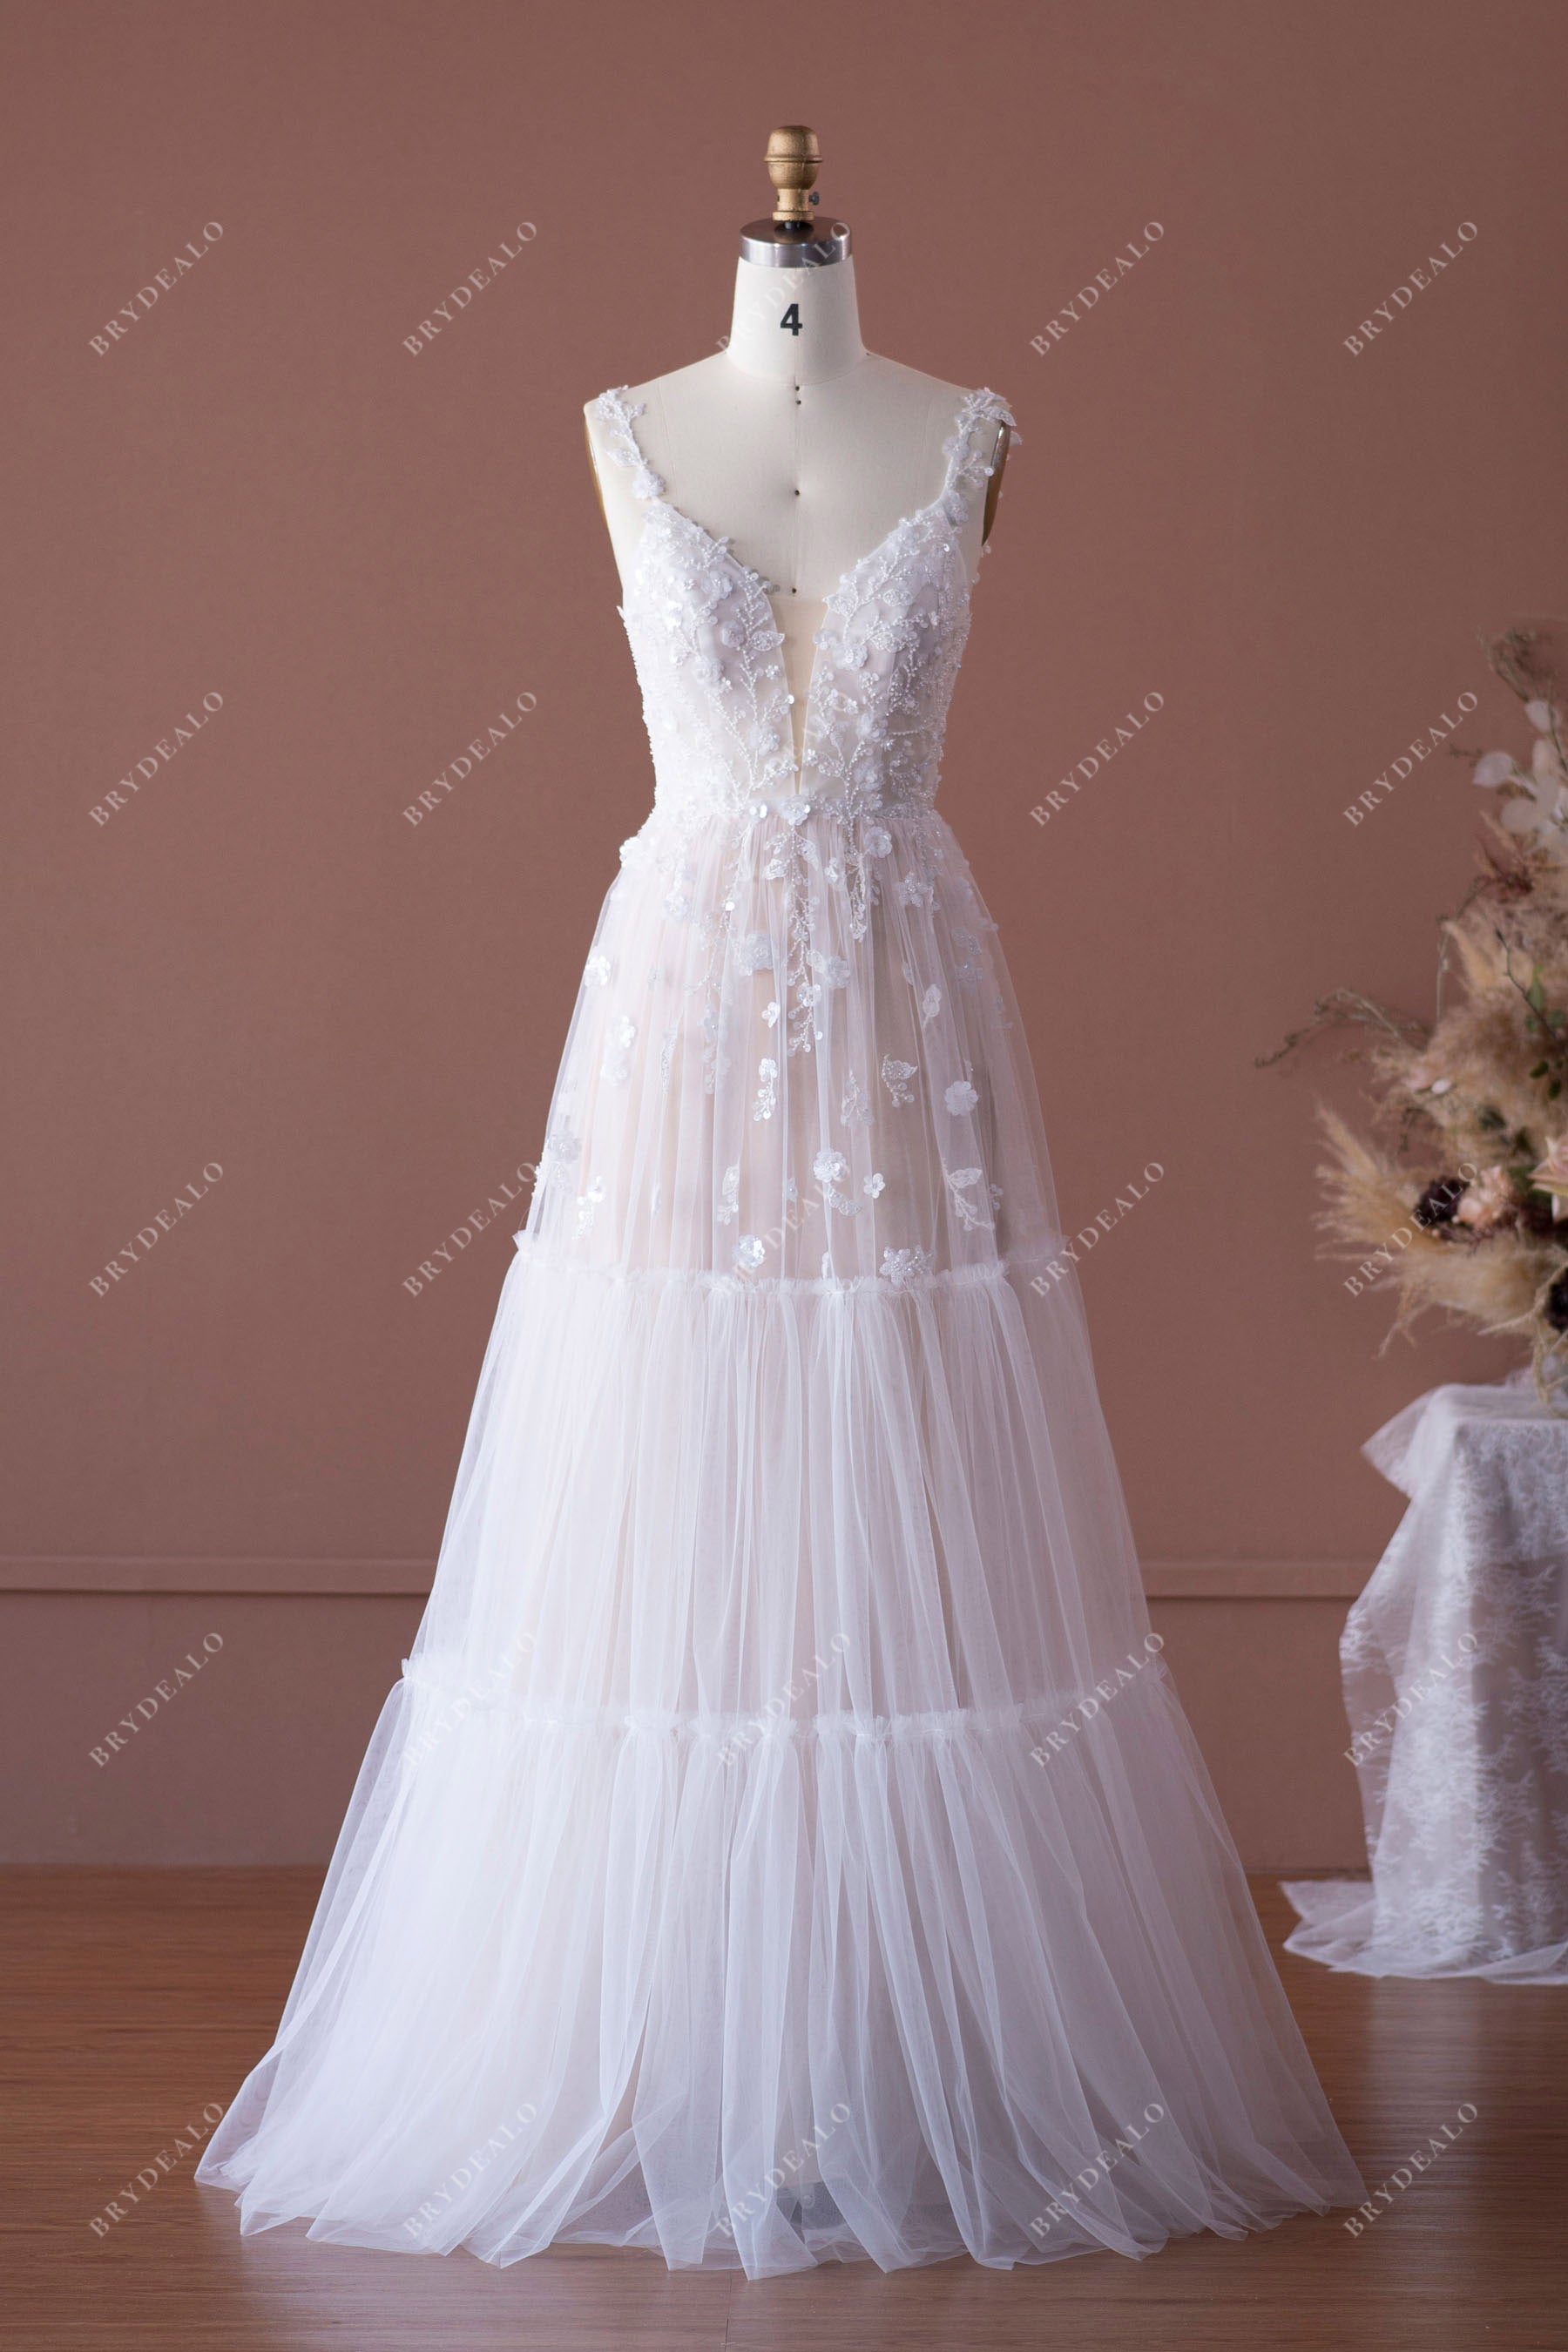 Fairy Flower Lace Layered A-line Wedding Dress